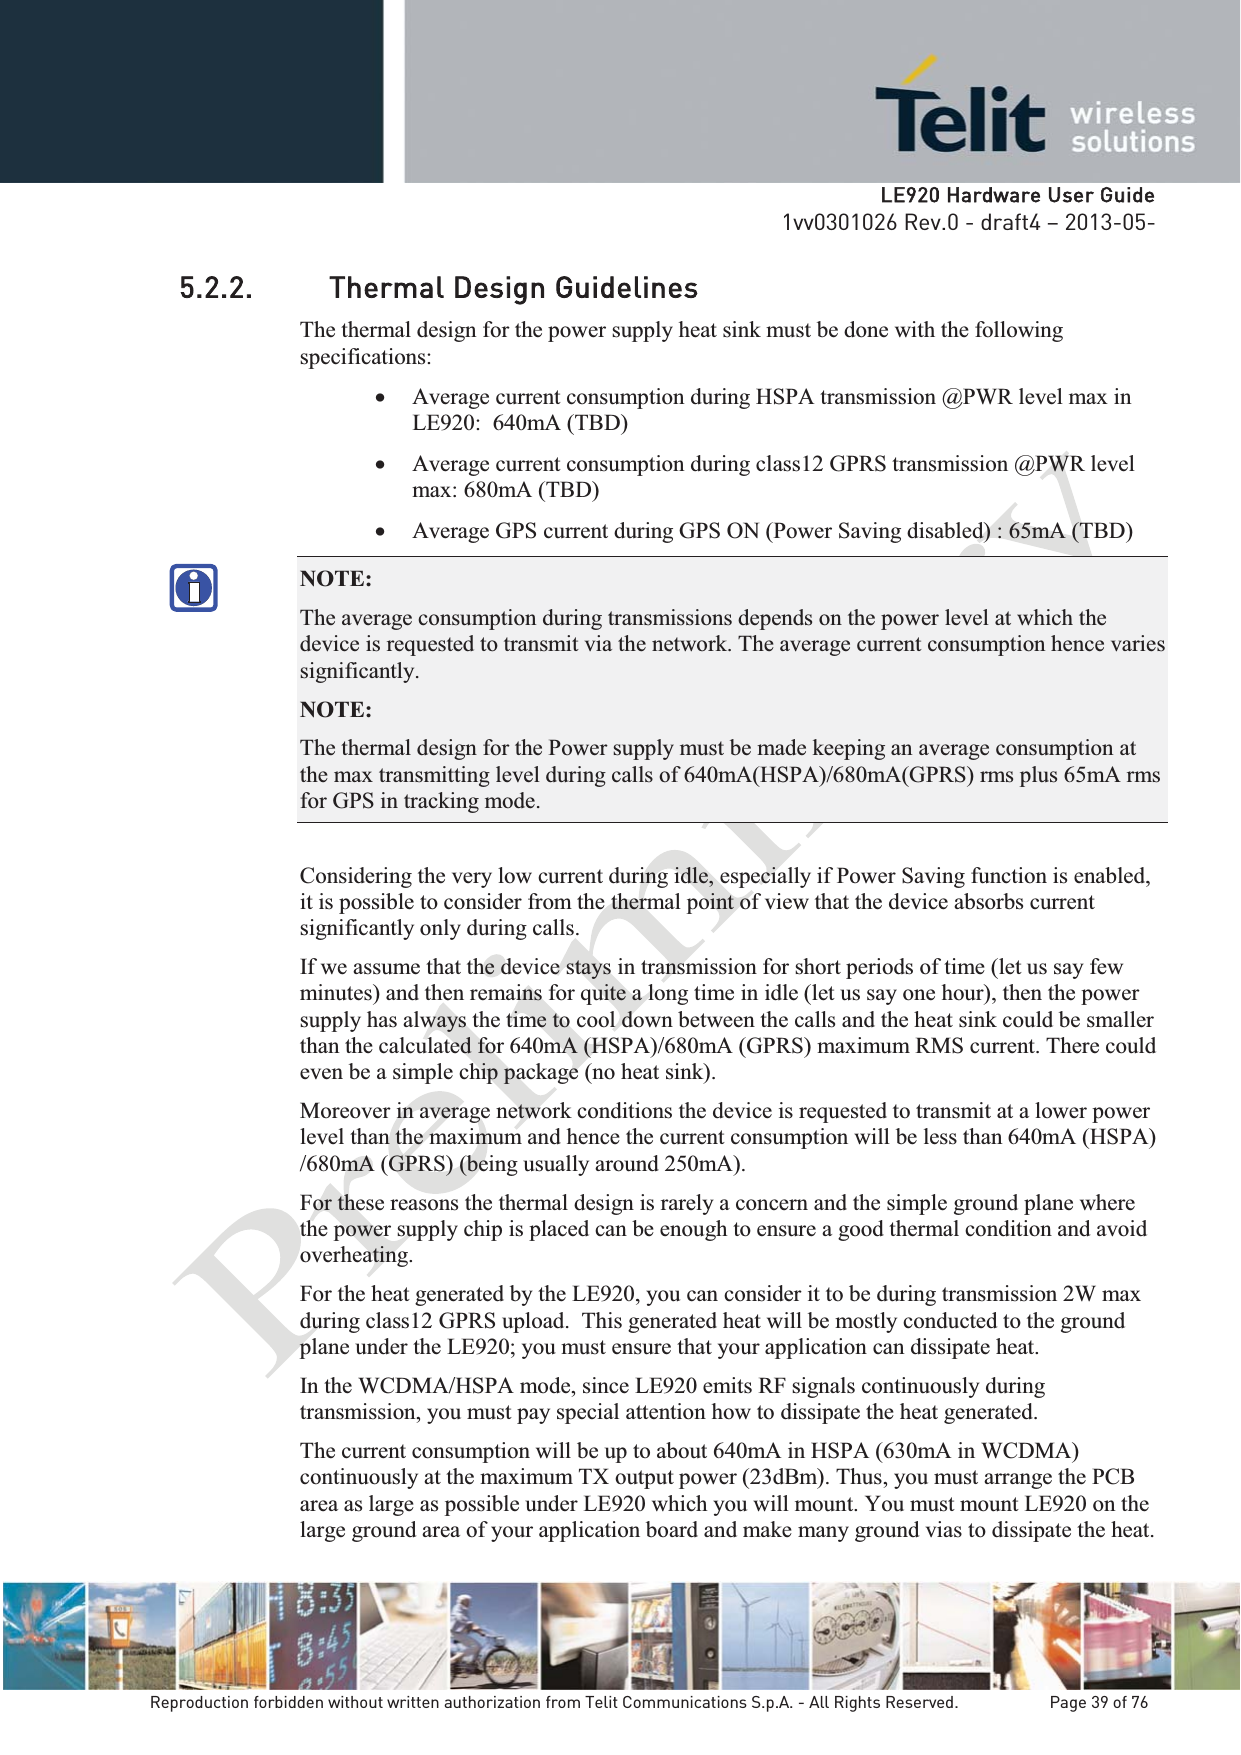   LLE920 Hardware User Guide1vv0301026 Rev.0 - draft4 – 2013-05-Reproduction forbidden without written authorization from Telit Communications S.p.A. - All Rights Reserved.    Page 39 of 76 5.2.2. Thermal Design Guidelines The thermal design for the power supply heat sink must be done with the following specifications: x Average current consumption during HSPA transmission @PWR level max in LE920:  640mA (TBD) x Average current consumption during class12 GPRS transmission @PWR level max: 680mA (TBD) x Average GPS current during GPS ON (Power Saving disabled) : 65mA (TBD) NOTE:  The average consumption during transmissions depends on the power level at which the device is requested to transmit via the network. The average current consumption hence varies significantly. NOTE:  The thermal design for the Power supply must be made keeping an average consumption at the max transmitting level during calls of 640mA(HSPA)/680mA(GPRS) rms plus 65mA rms for GPS in tracking mode. Considering the very low current during idle, especially if Power Saving function is enabled, it is possible to consider from the thermal point of view that the device absorbs current significantly only during calls.  If we assume that the device stays in transmission for short periods of time (let us say few minutes) and then remains for quite a long time in idle (let us say one hour), then the power supply has always the time to cool down between the calls and the heat sink could be smaller than the calculated for 640mA (HSPA)/680mA (GPRS) maximum RMS current. There could even be a simple chip package (no heat sink). Moreover in average network conditions the device is requested to transmit at a lower power level than the maximum and hence the current consumption will be less than 640mA (HSPA) /680mA (GPRS) (being usually around 250mA). For these reasons the thermal design is rarely a concern and the simple ground plane where the power supply chip is placed can be enough to ensure a good thermal condition and avoid overheating. For the heat generated by the LE920, you can consider it to be during transmission 2W max during class12 GPRS upload.  This generated heat will be mostly conducted to the ground plane under the LE920; you must ensure that your application can dissipate heat. In the WCDMA/HSPA mode, since LE920 emits RF signals continuously during transmission, you must pay special attention how to dissipate the heat generated. The current consumption will be up to about 640mA in HSPA (630mA in WCDMA) continuously at the maximum TX output power (23dBm). Thus, you must arrange the PCB area as large as possible under LE920 which you will mount. You must mount LE920 on the large ground area of your application board and make many ground vias to dissipate the heat. 